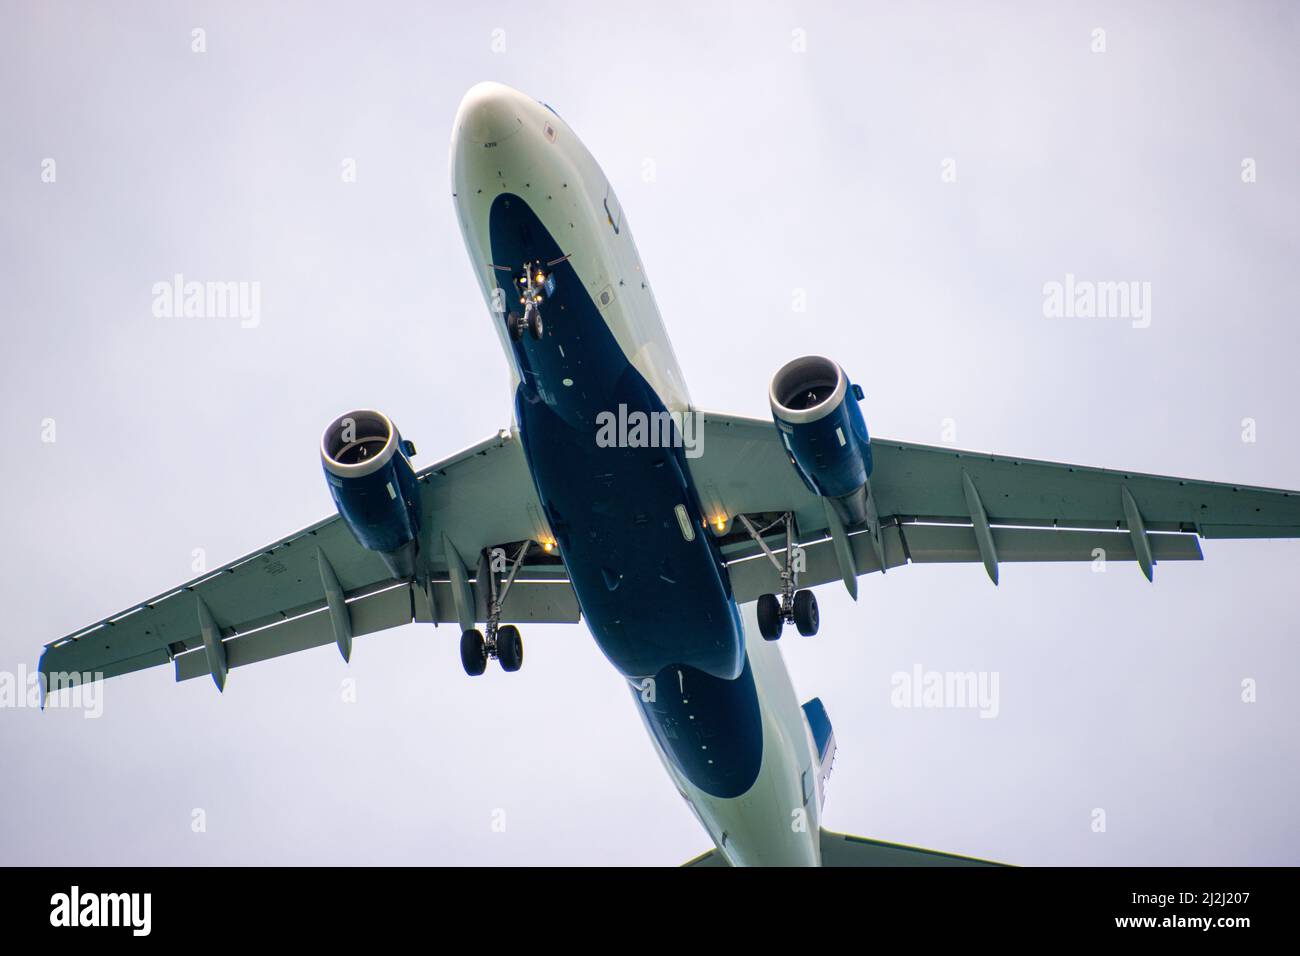 A close up view of a passenger jet airliner on final approach Stock Photo